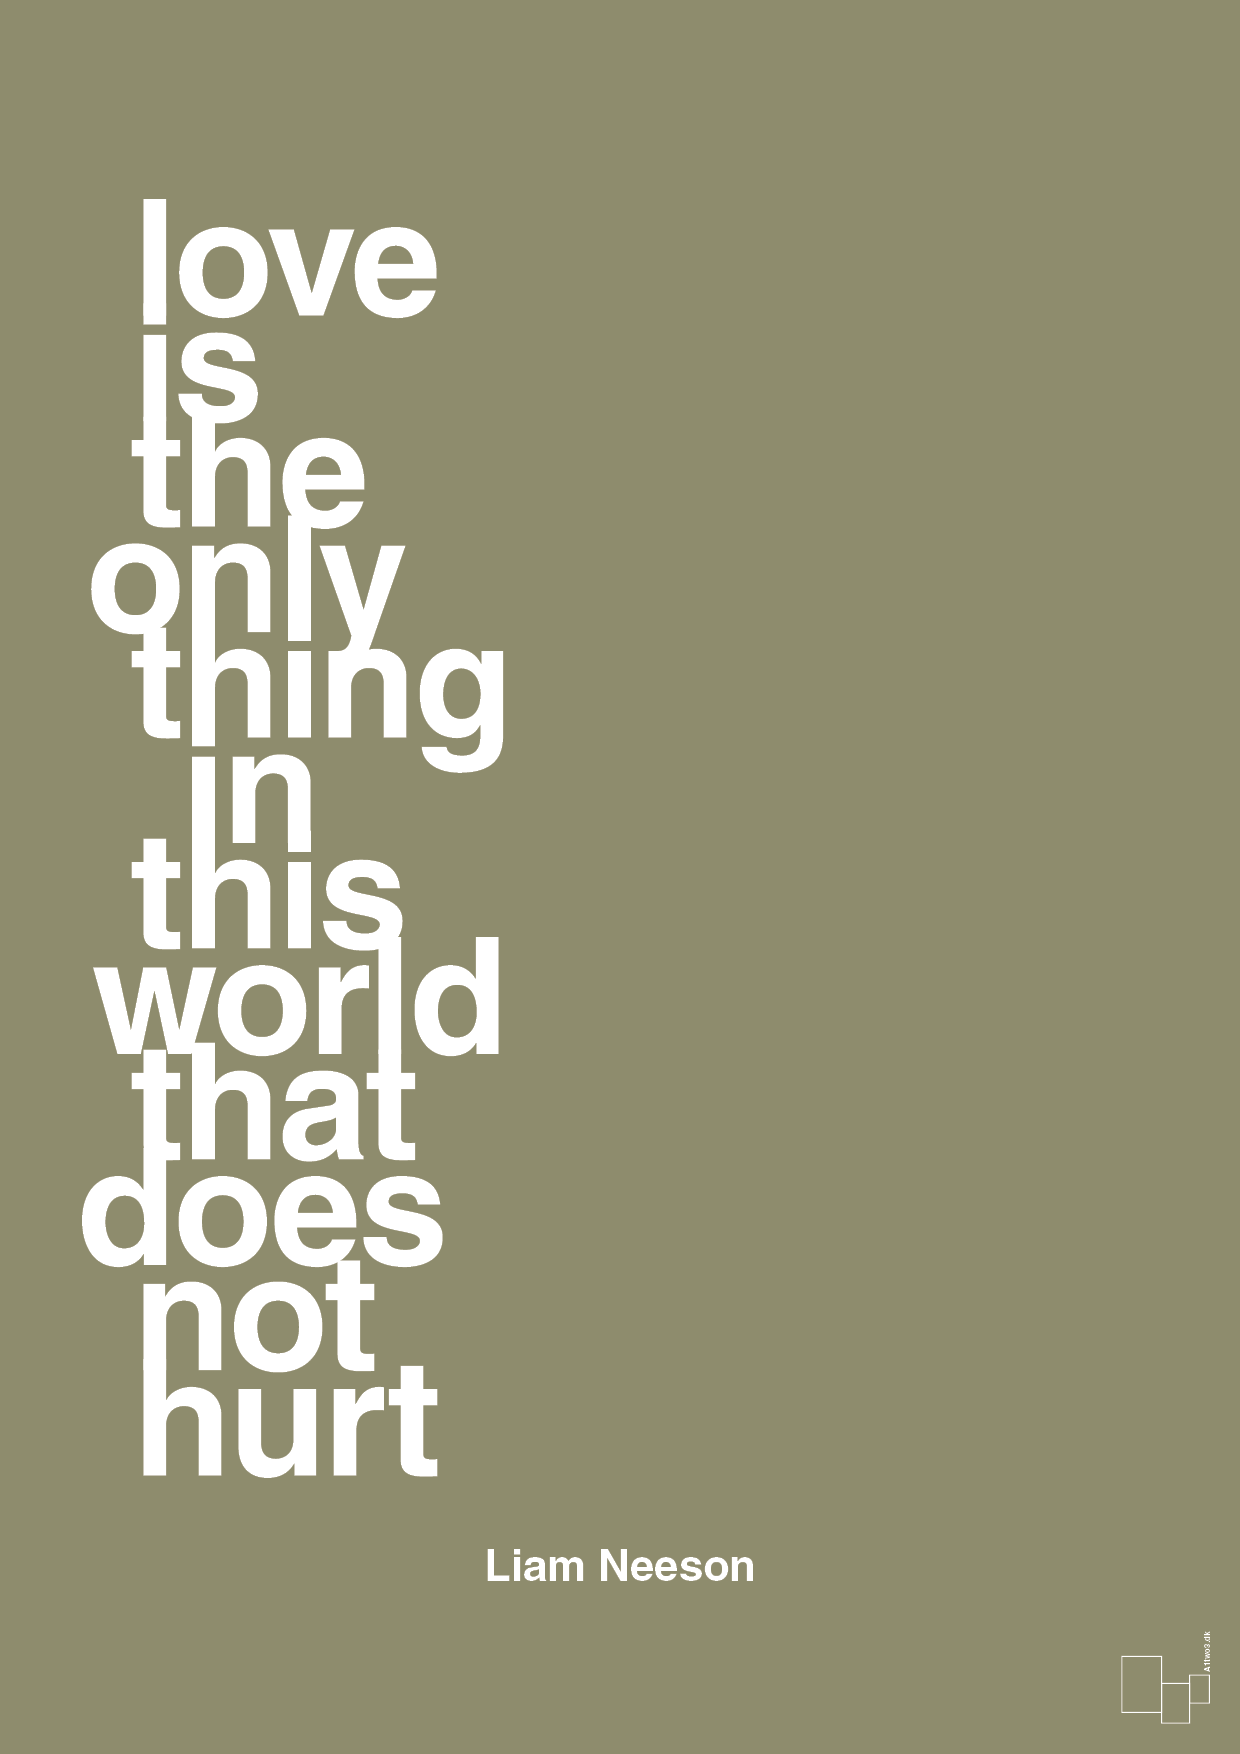 love is the only thing in this world that does not hurt - Plakat med Citater i Misty Forrest